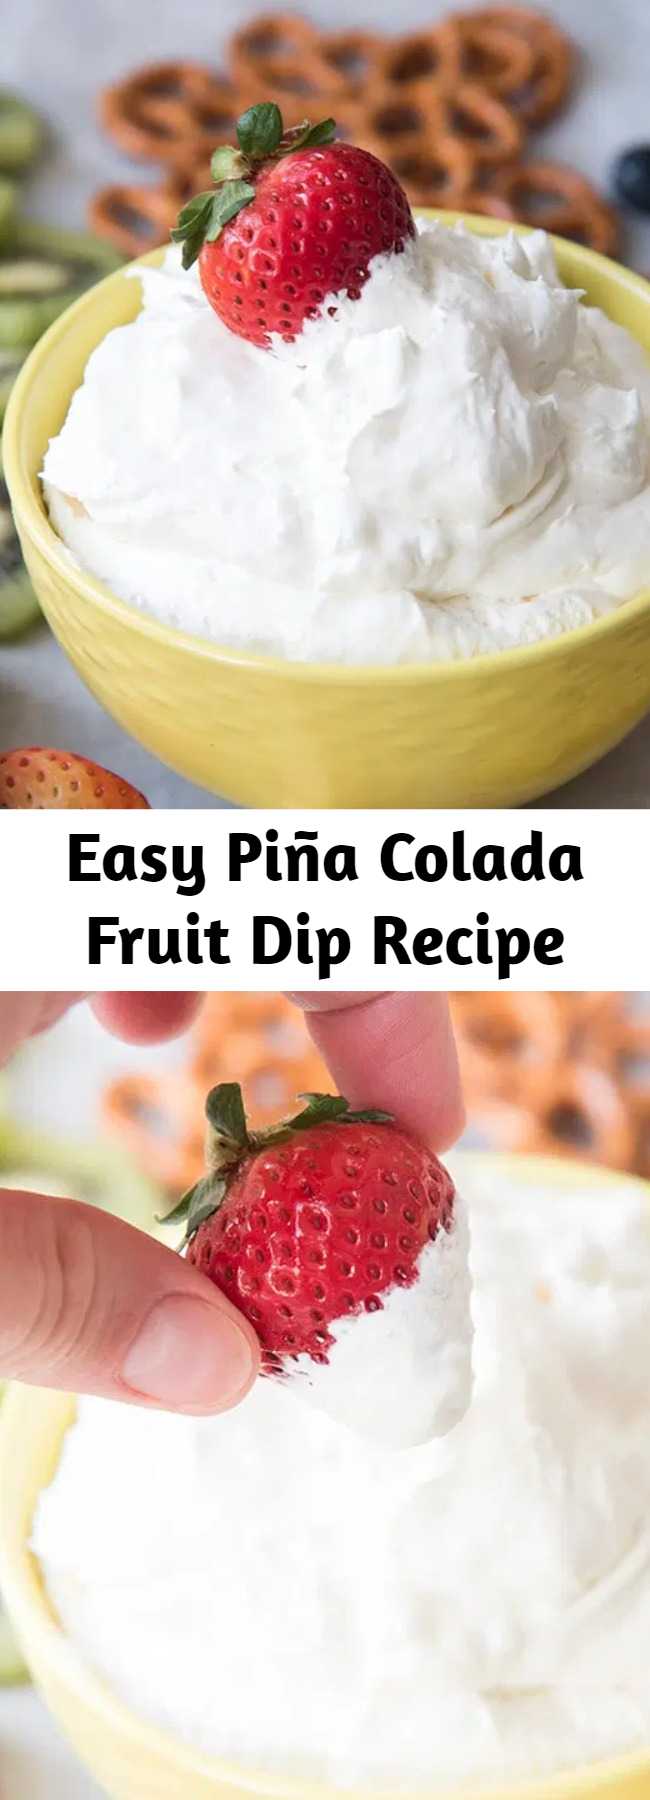 Easy Piña Colada Fruit Dip Recipe - This fruit dip combines those great piña colada flavors of coconut and pineapple, along with cream cheese and cool whip for a perfect fruit dip.